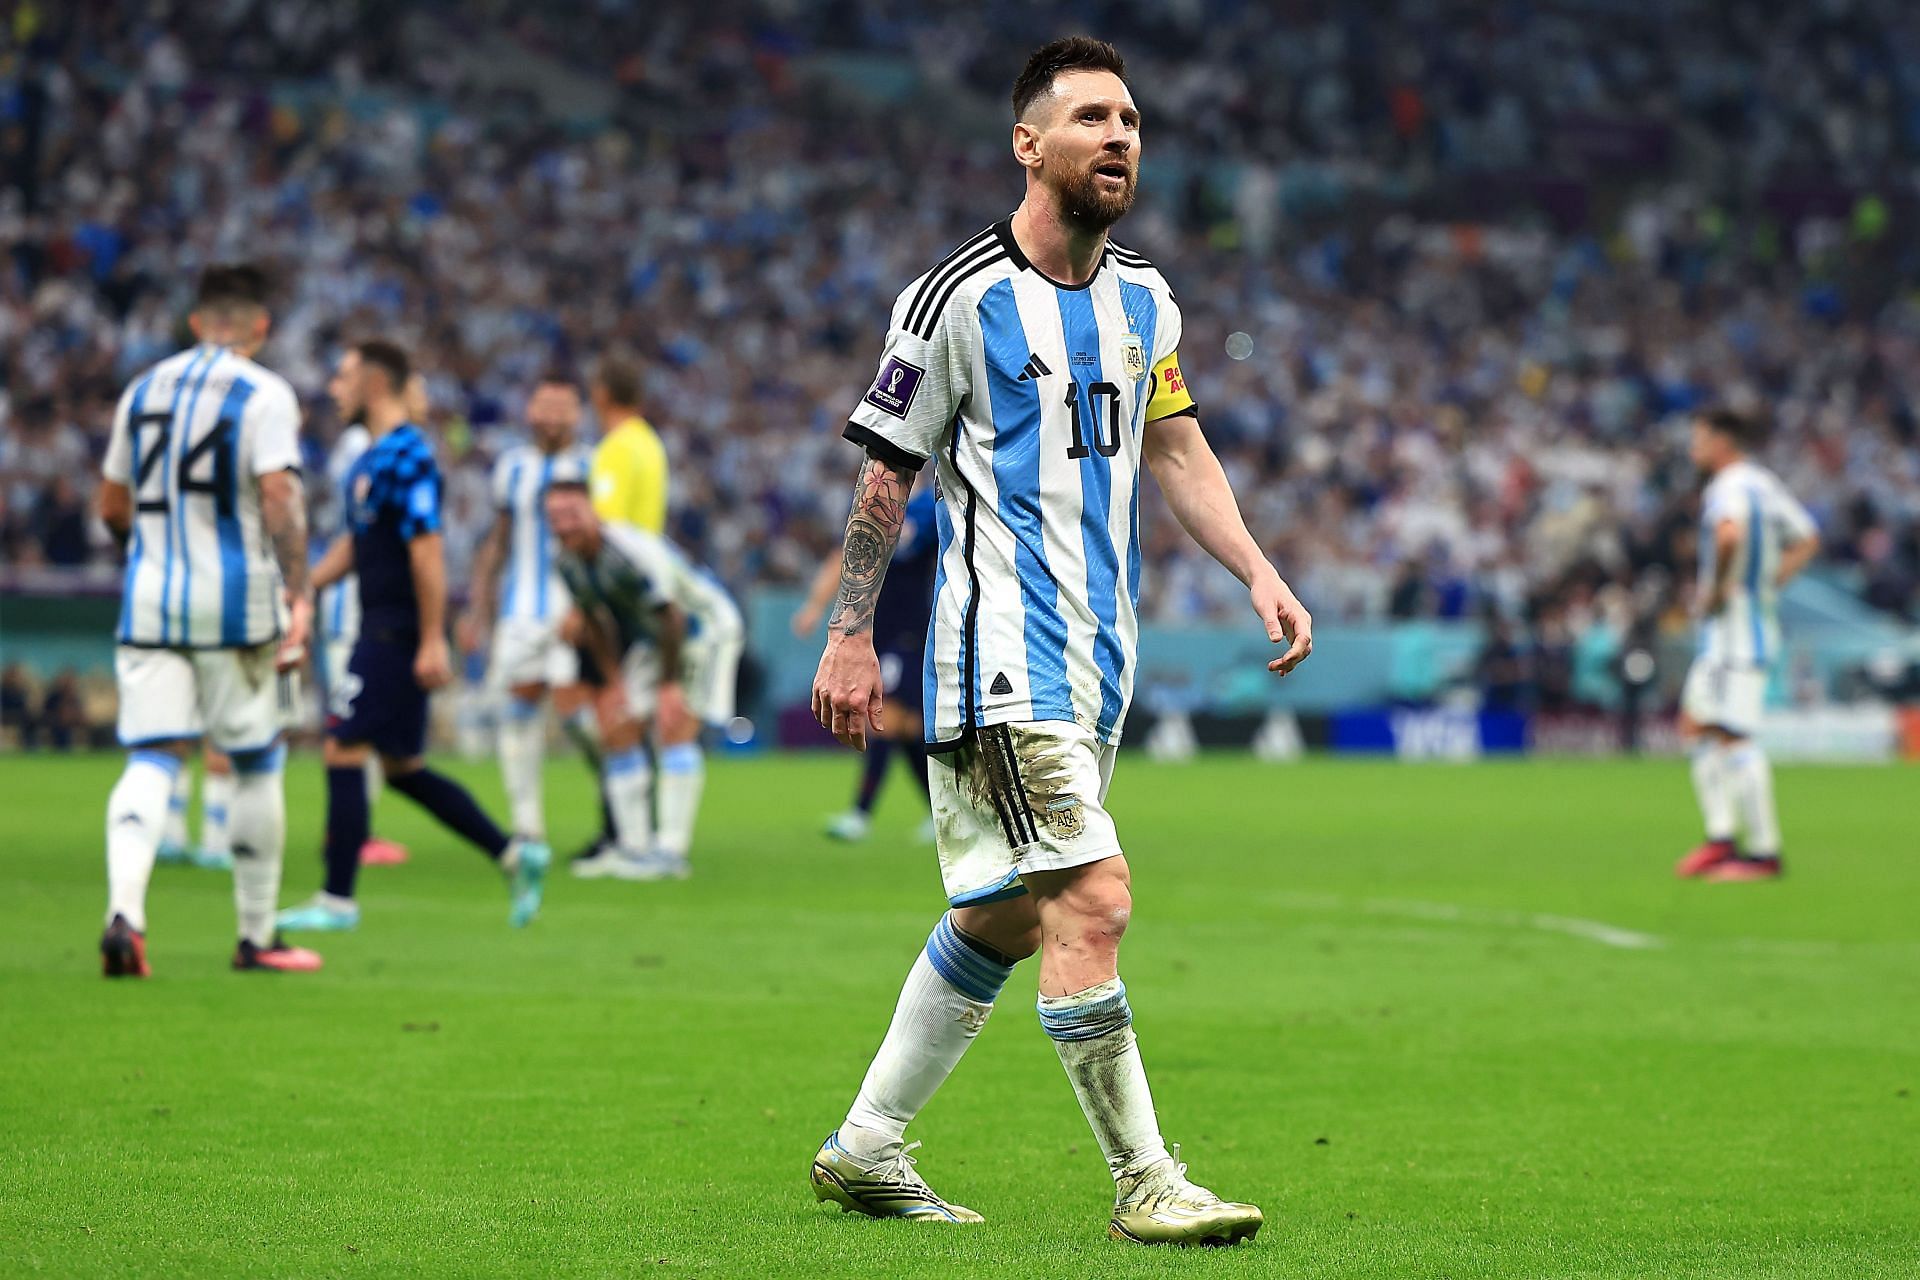 Messi becomes Argentina's top in FIFA World Cup history